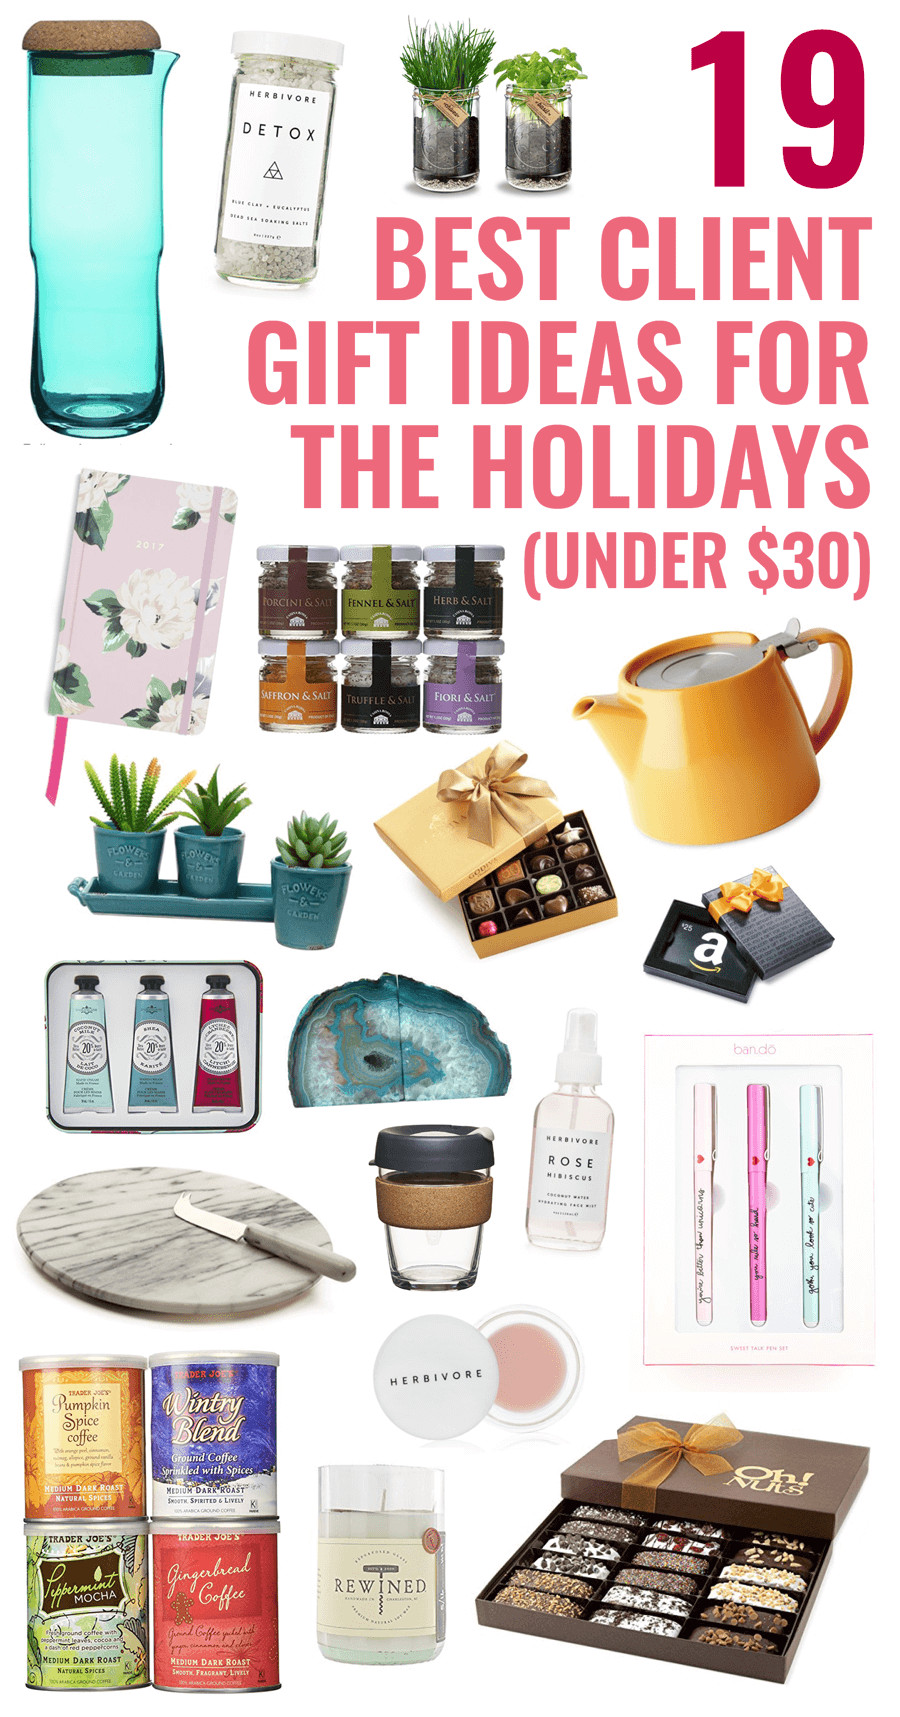 Holiday Gift Ideas For Clients
 19 Best Client Gift Ideas for the Holidays under $30